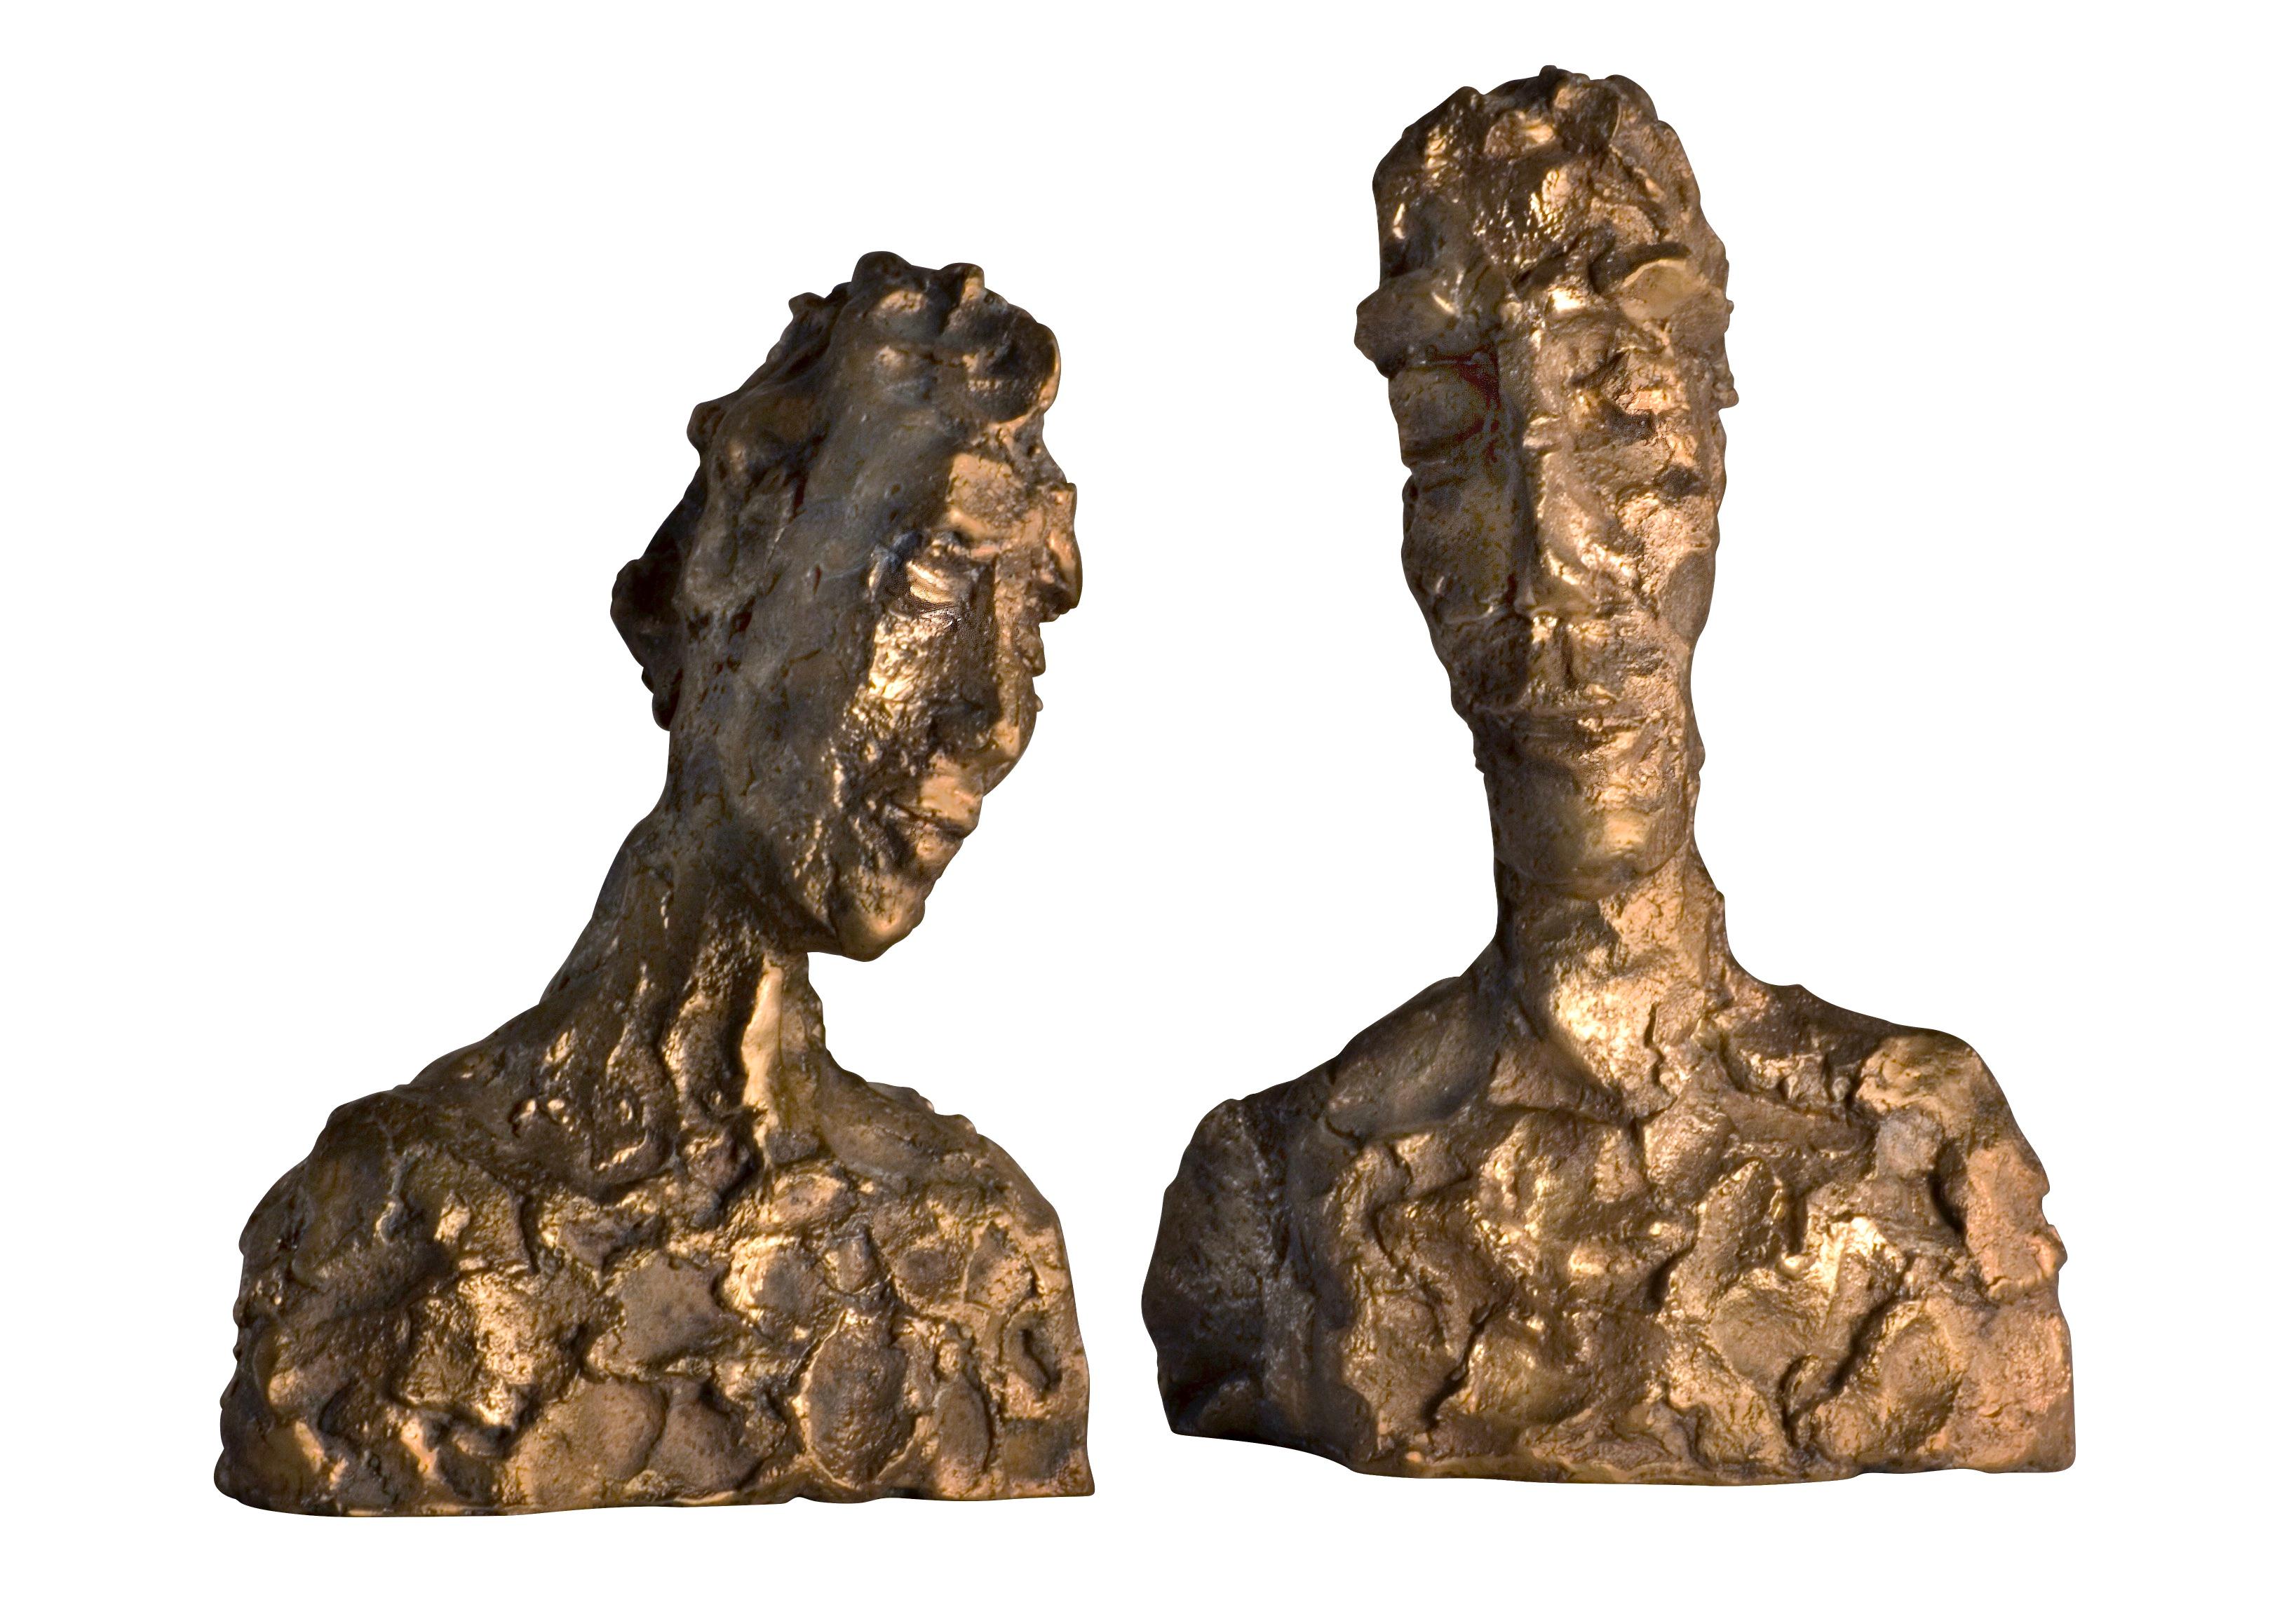 This raw bronze sculpture has a natural golden brass finish. The female and male Giacometti-influenced portraits are individual objects and can be positioned in various combinations to achieve a unique perspective. Placed facing one another - a